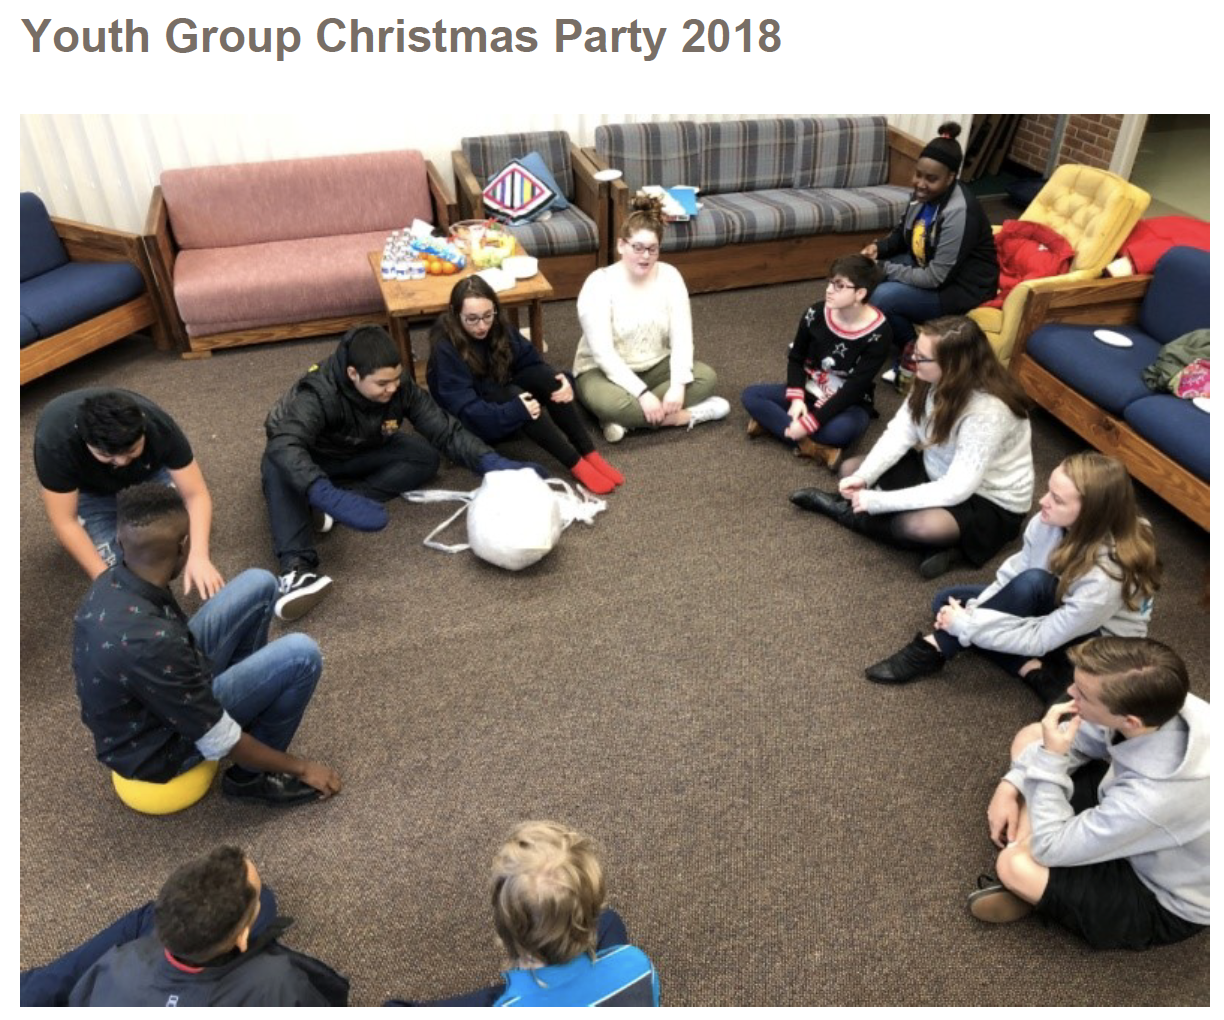 7YouthGroupChristmasParty2018-1.png